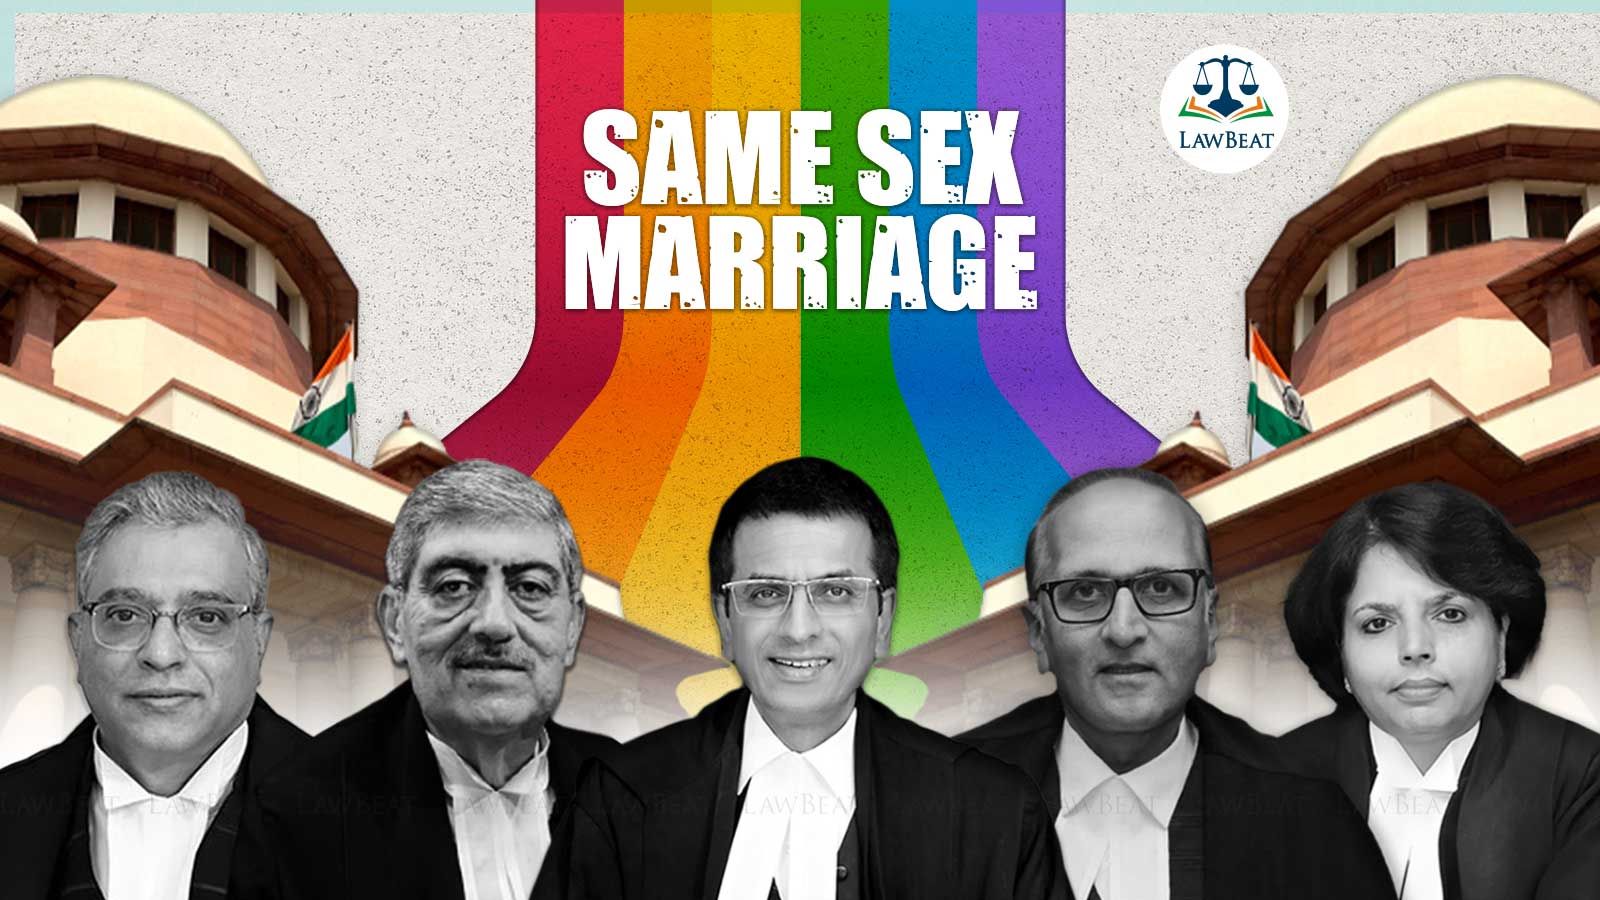 Lawbeat Same Sex Marriage Recognition Cant Deny Link Between Special Marriage Act And 6404